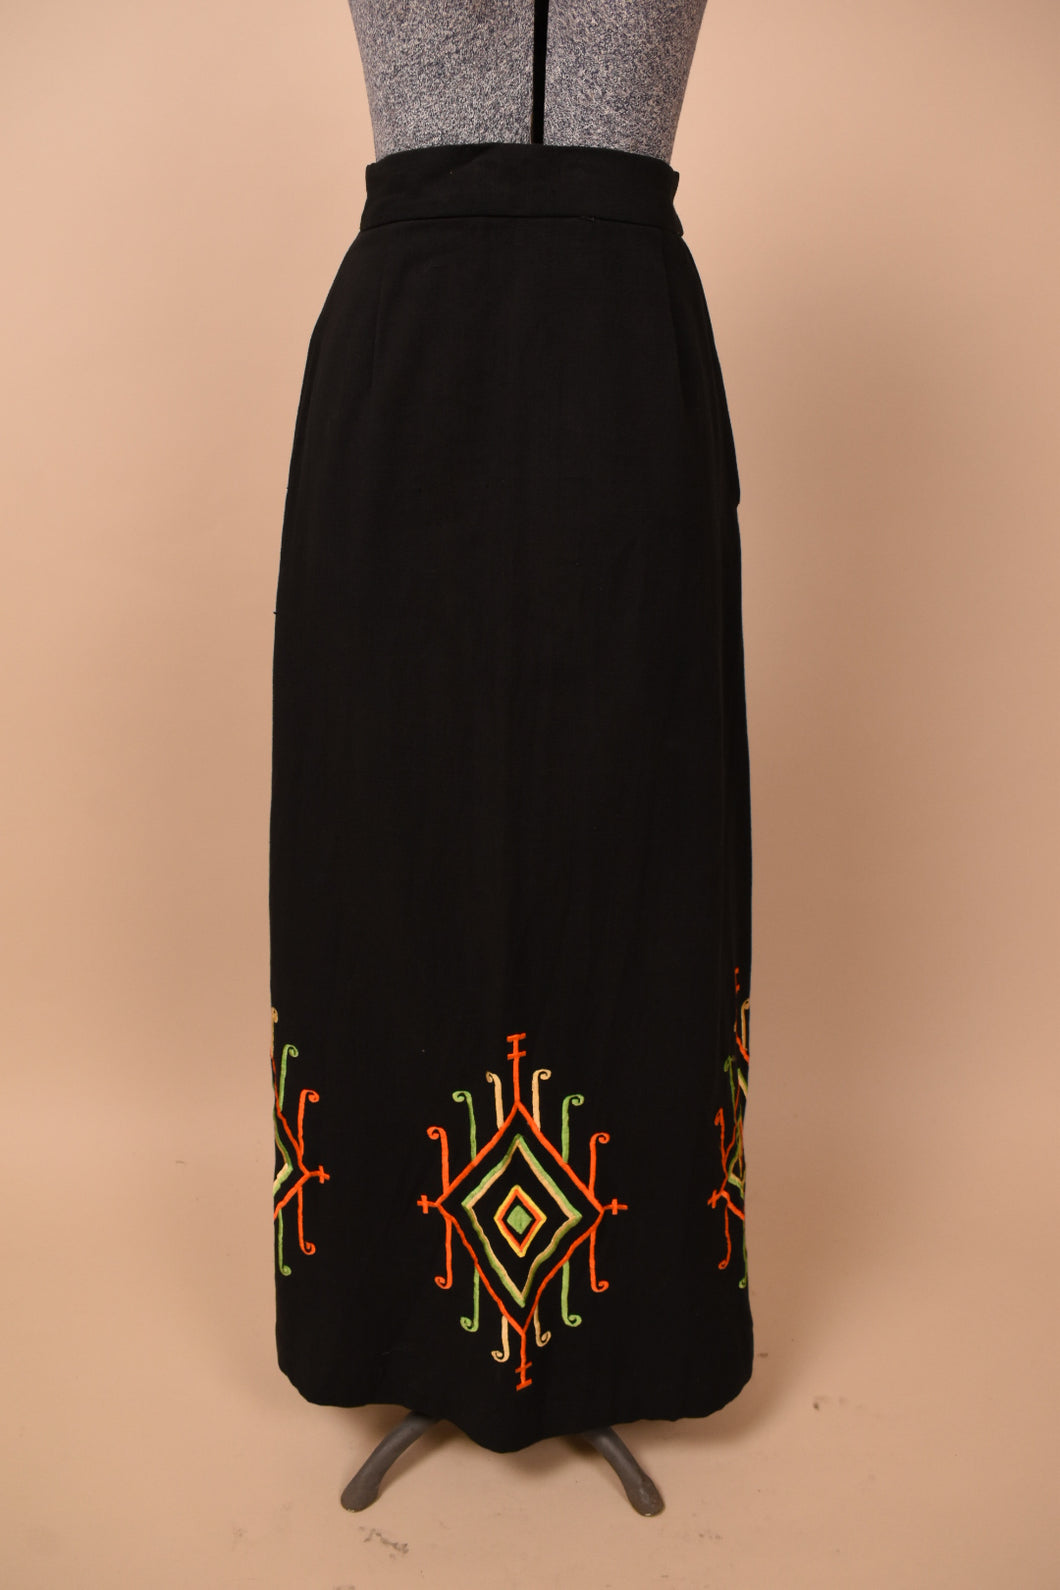 Vintage 1960's black column maxi skirt is shown from the front. This skirt has a red, green, and yellow embroidered design at the bottom hem. 